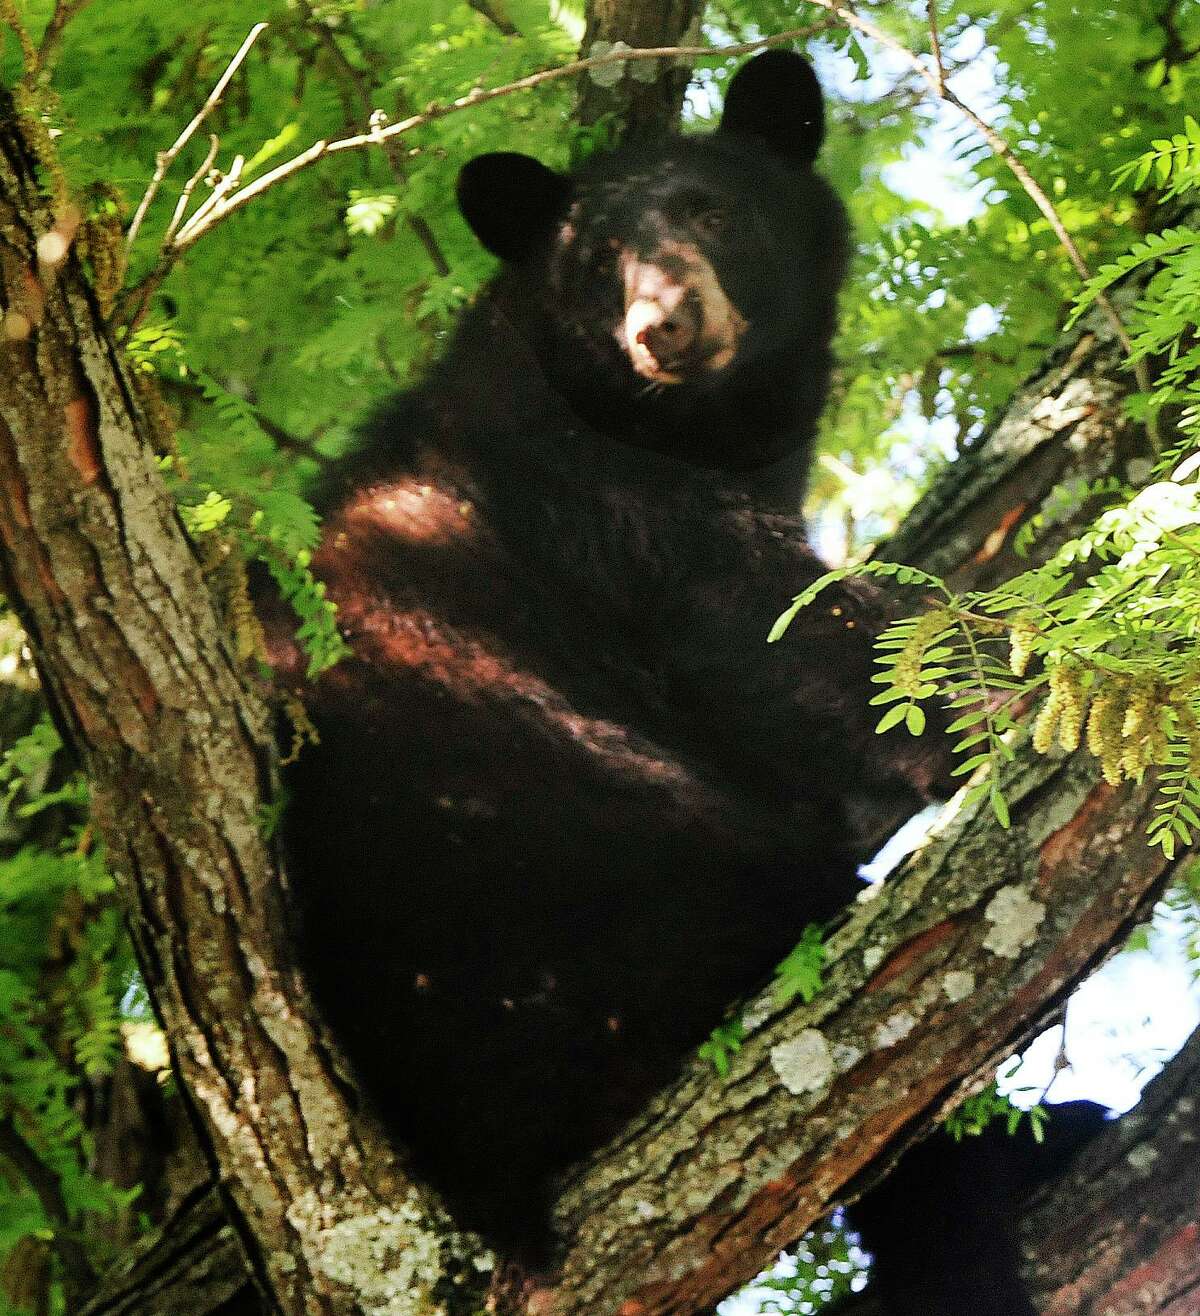 A bear was found in a tree along West Wooster Street in Danbury, Conn., on Tuesday, June 4, 2013.